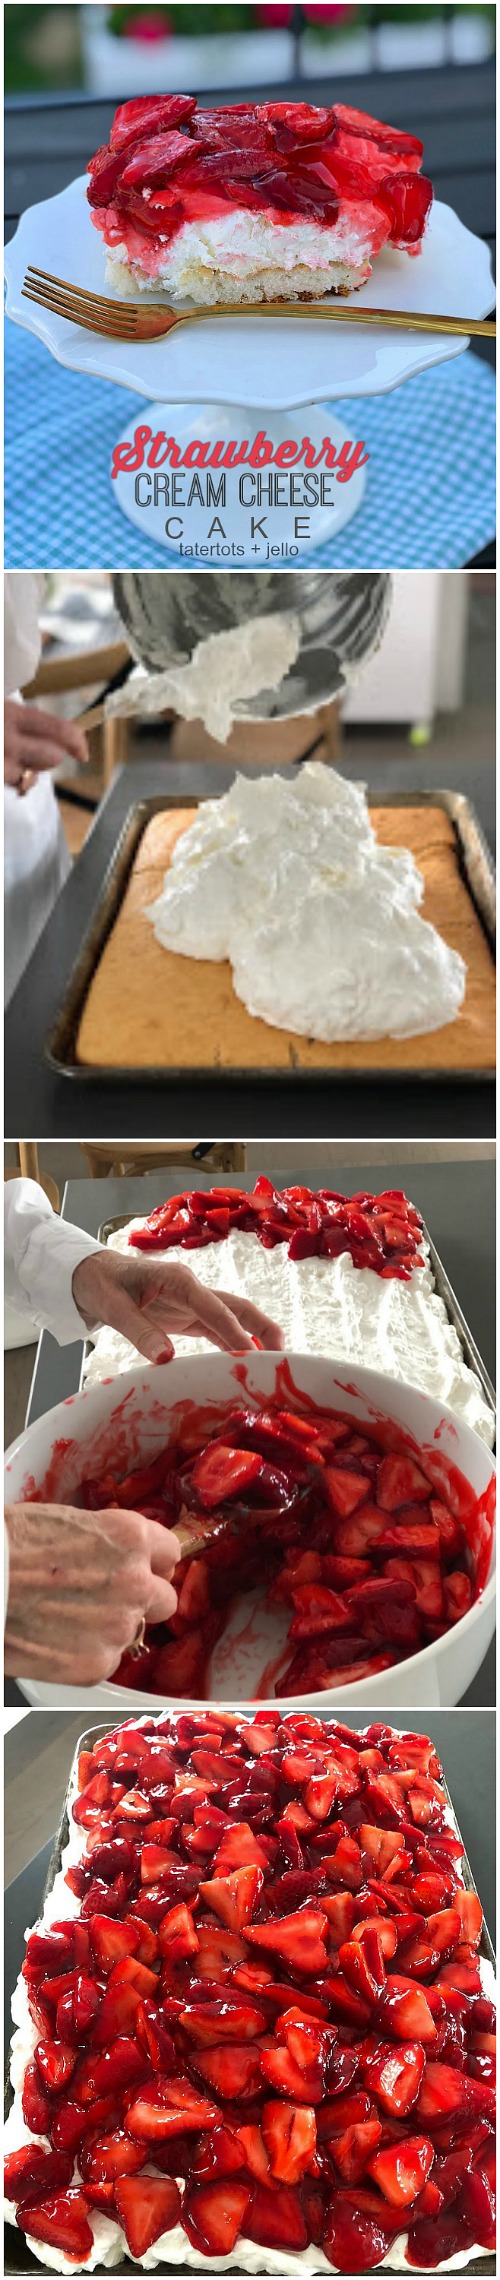 The BEST  Fresh Strawberry Cream Cheese Cake Recipe. Moist white cake covered in a fluffy layer of cream cheese and whipped cream with a topping of luscious fresh strawberries in a sweet strawberry glaze. Everyone will fall in love with this delicious, easy cake.  